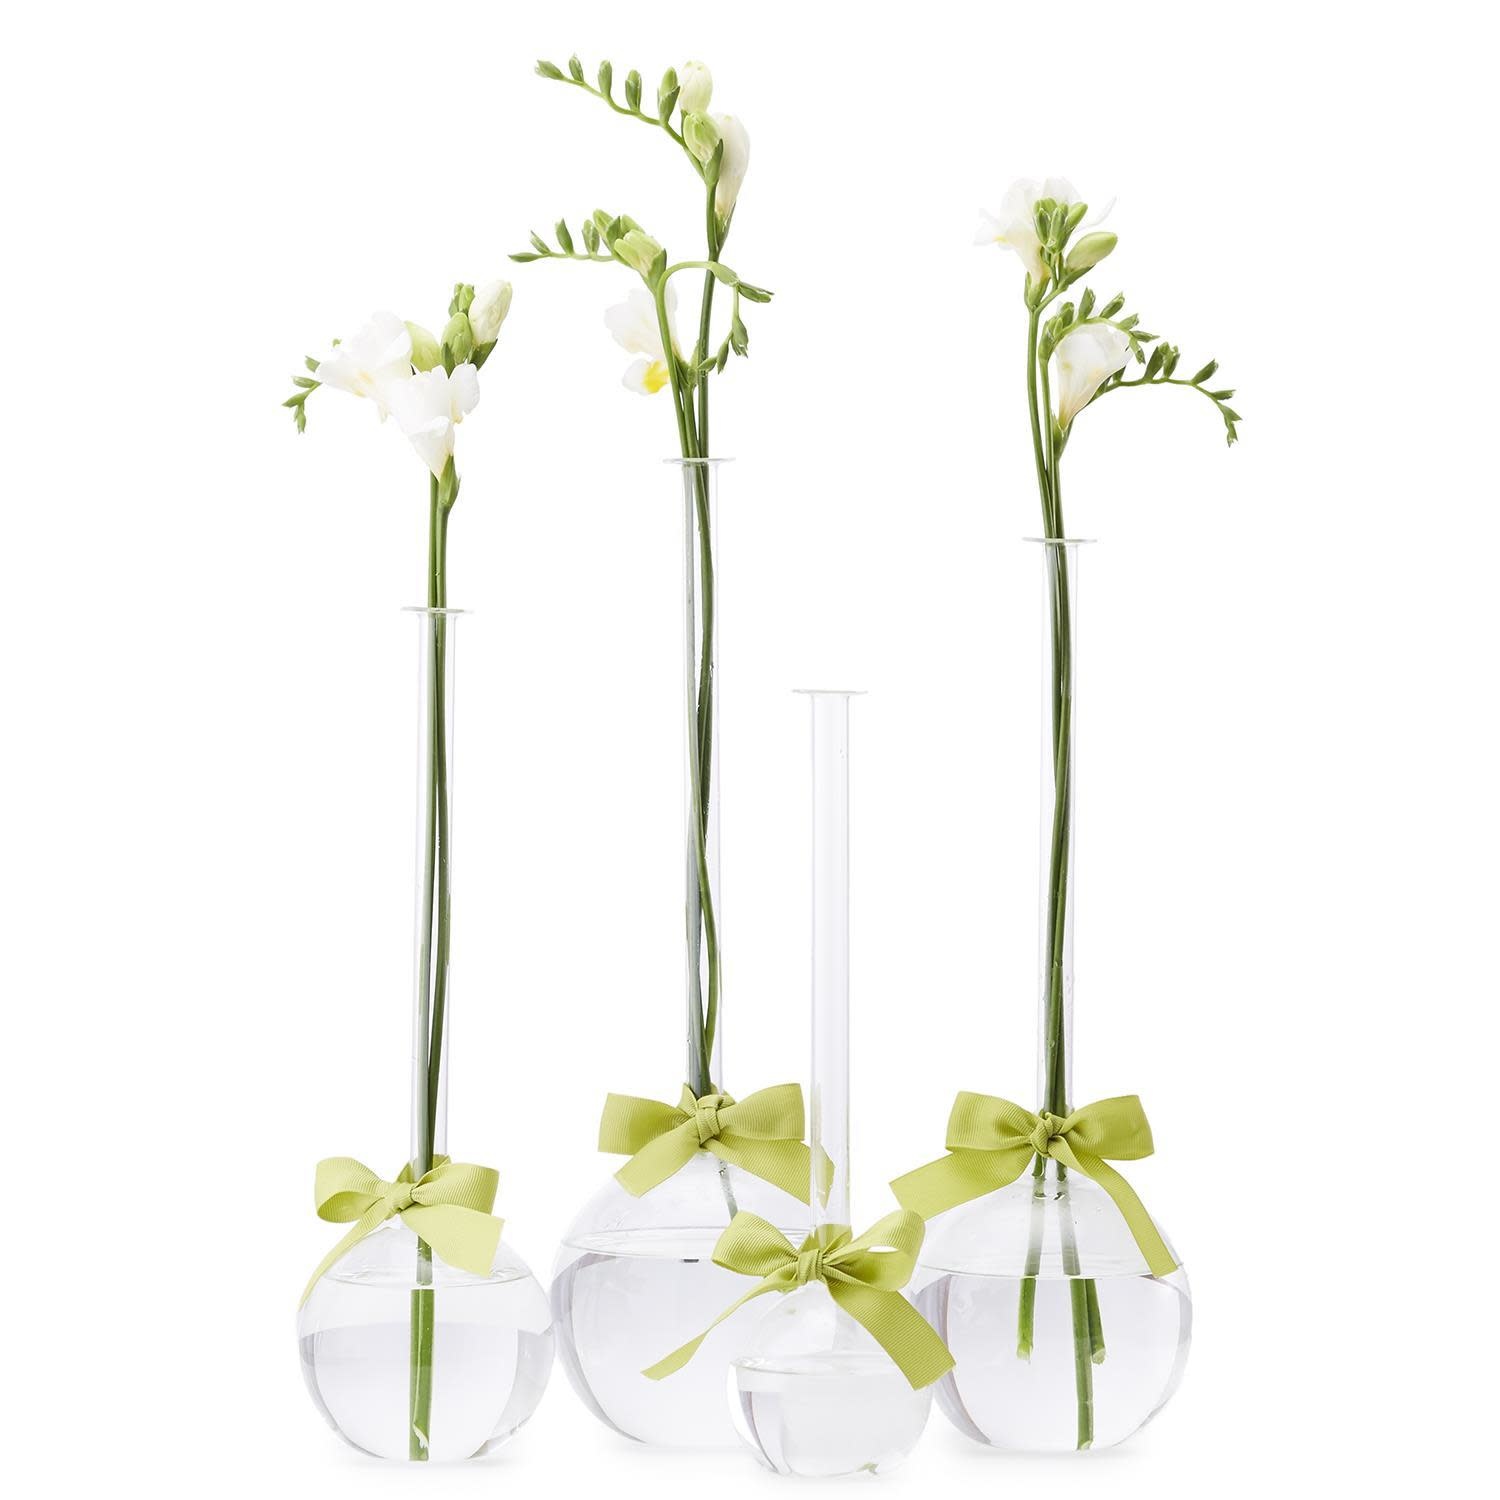 Sleek & Chic  Bubbles Vases XL (Include Green Ribbon), Available for local pick up